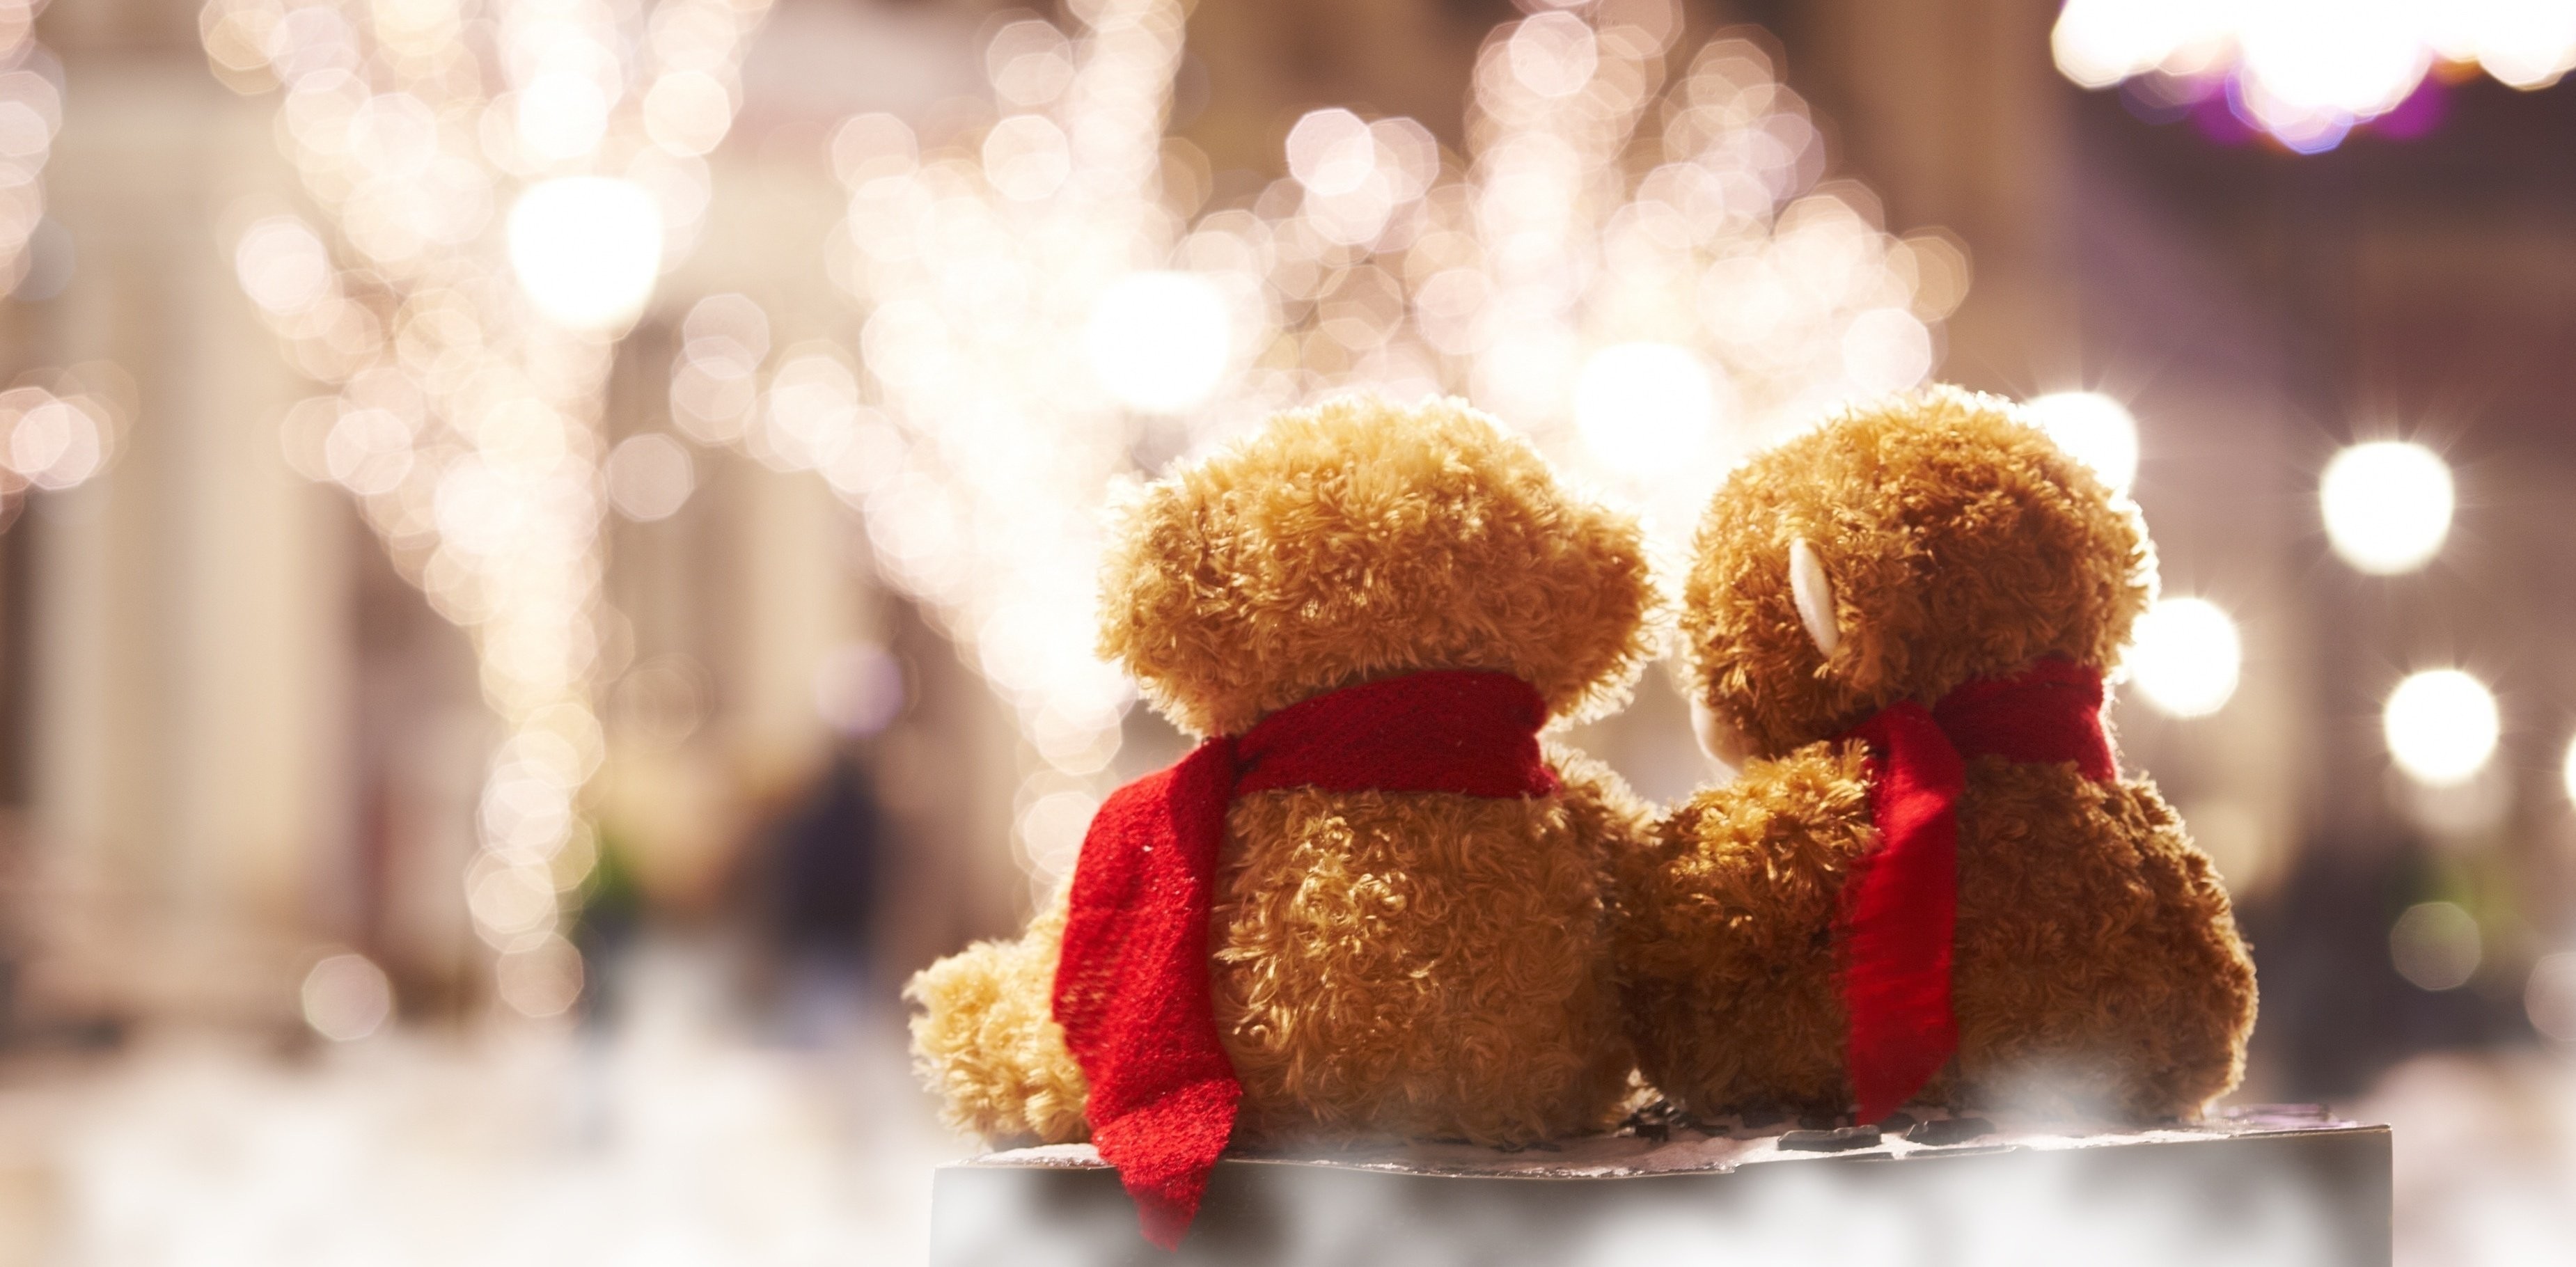 3700x1820 Teddy bear romance together lights love mood toy wallpaper |  |  848754 | WallpaperUP